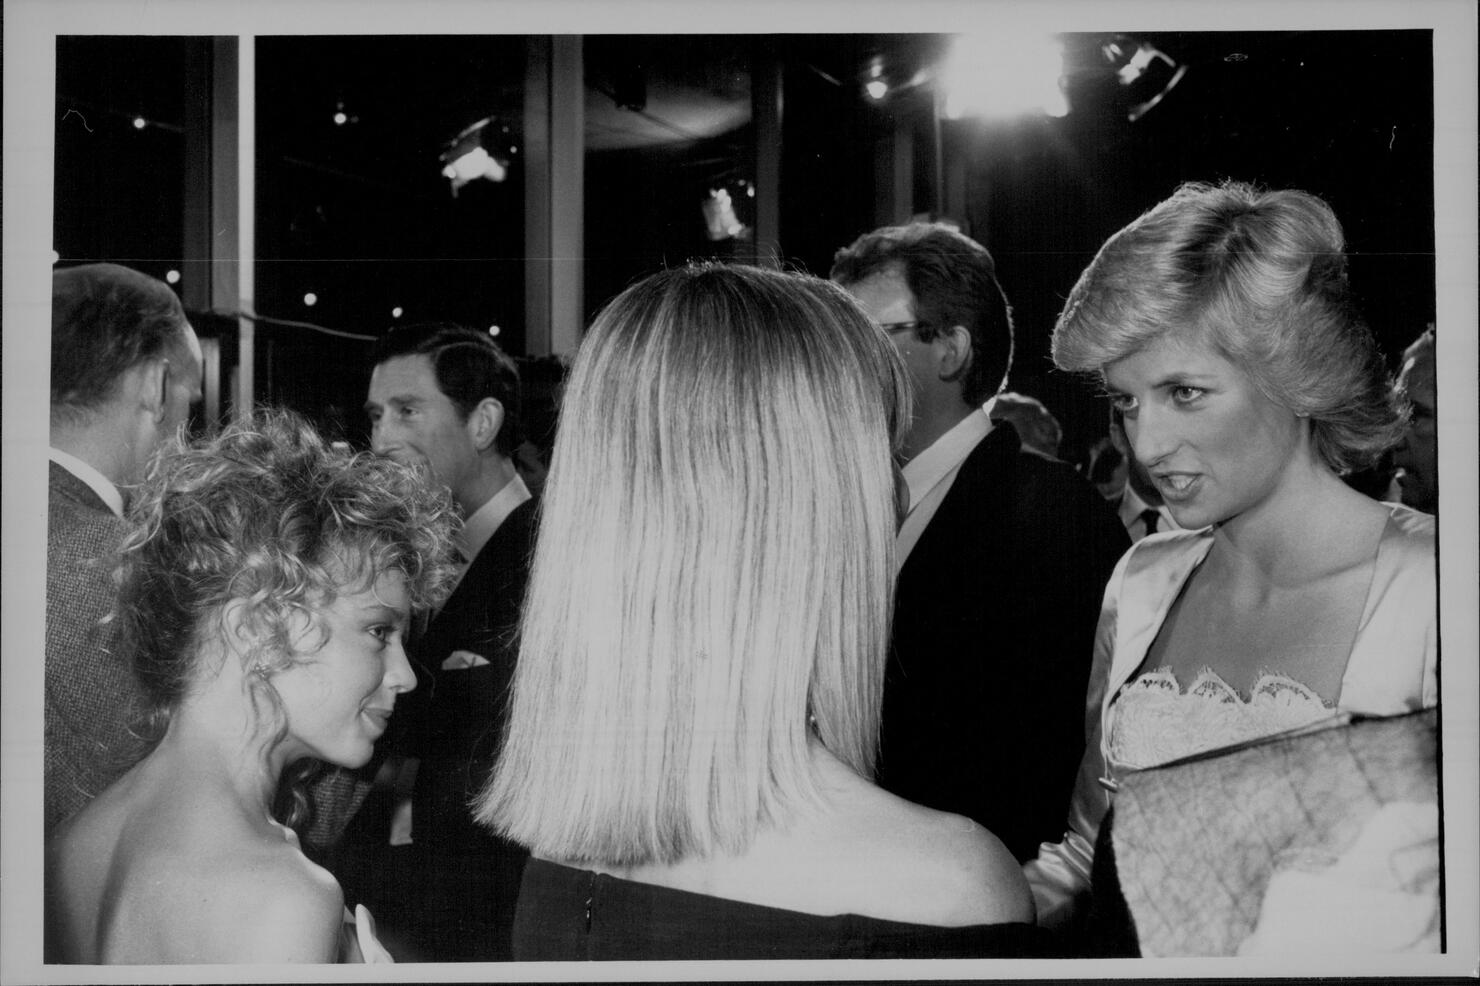 The Royals meet the stars at the Entertainment centre tonight.Princess Diana talking to (L to R) Kylie Minogue, Olivia Newton John at the Entertainment center.